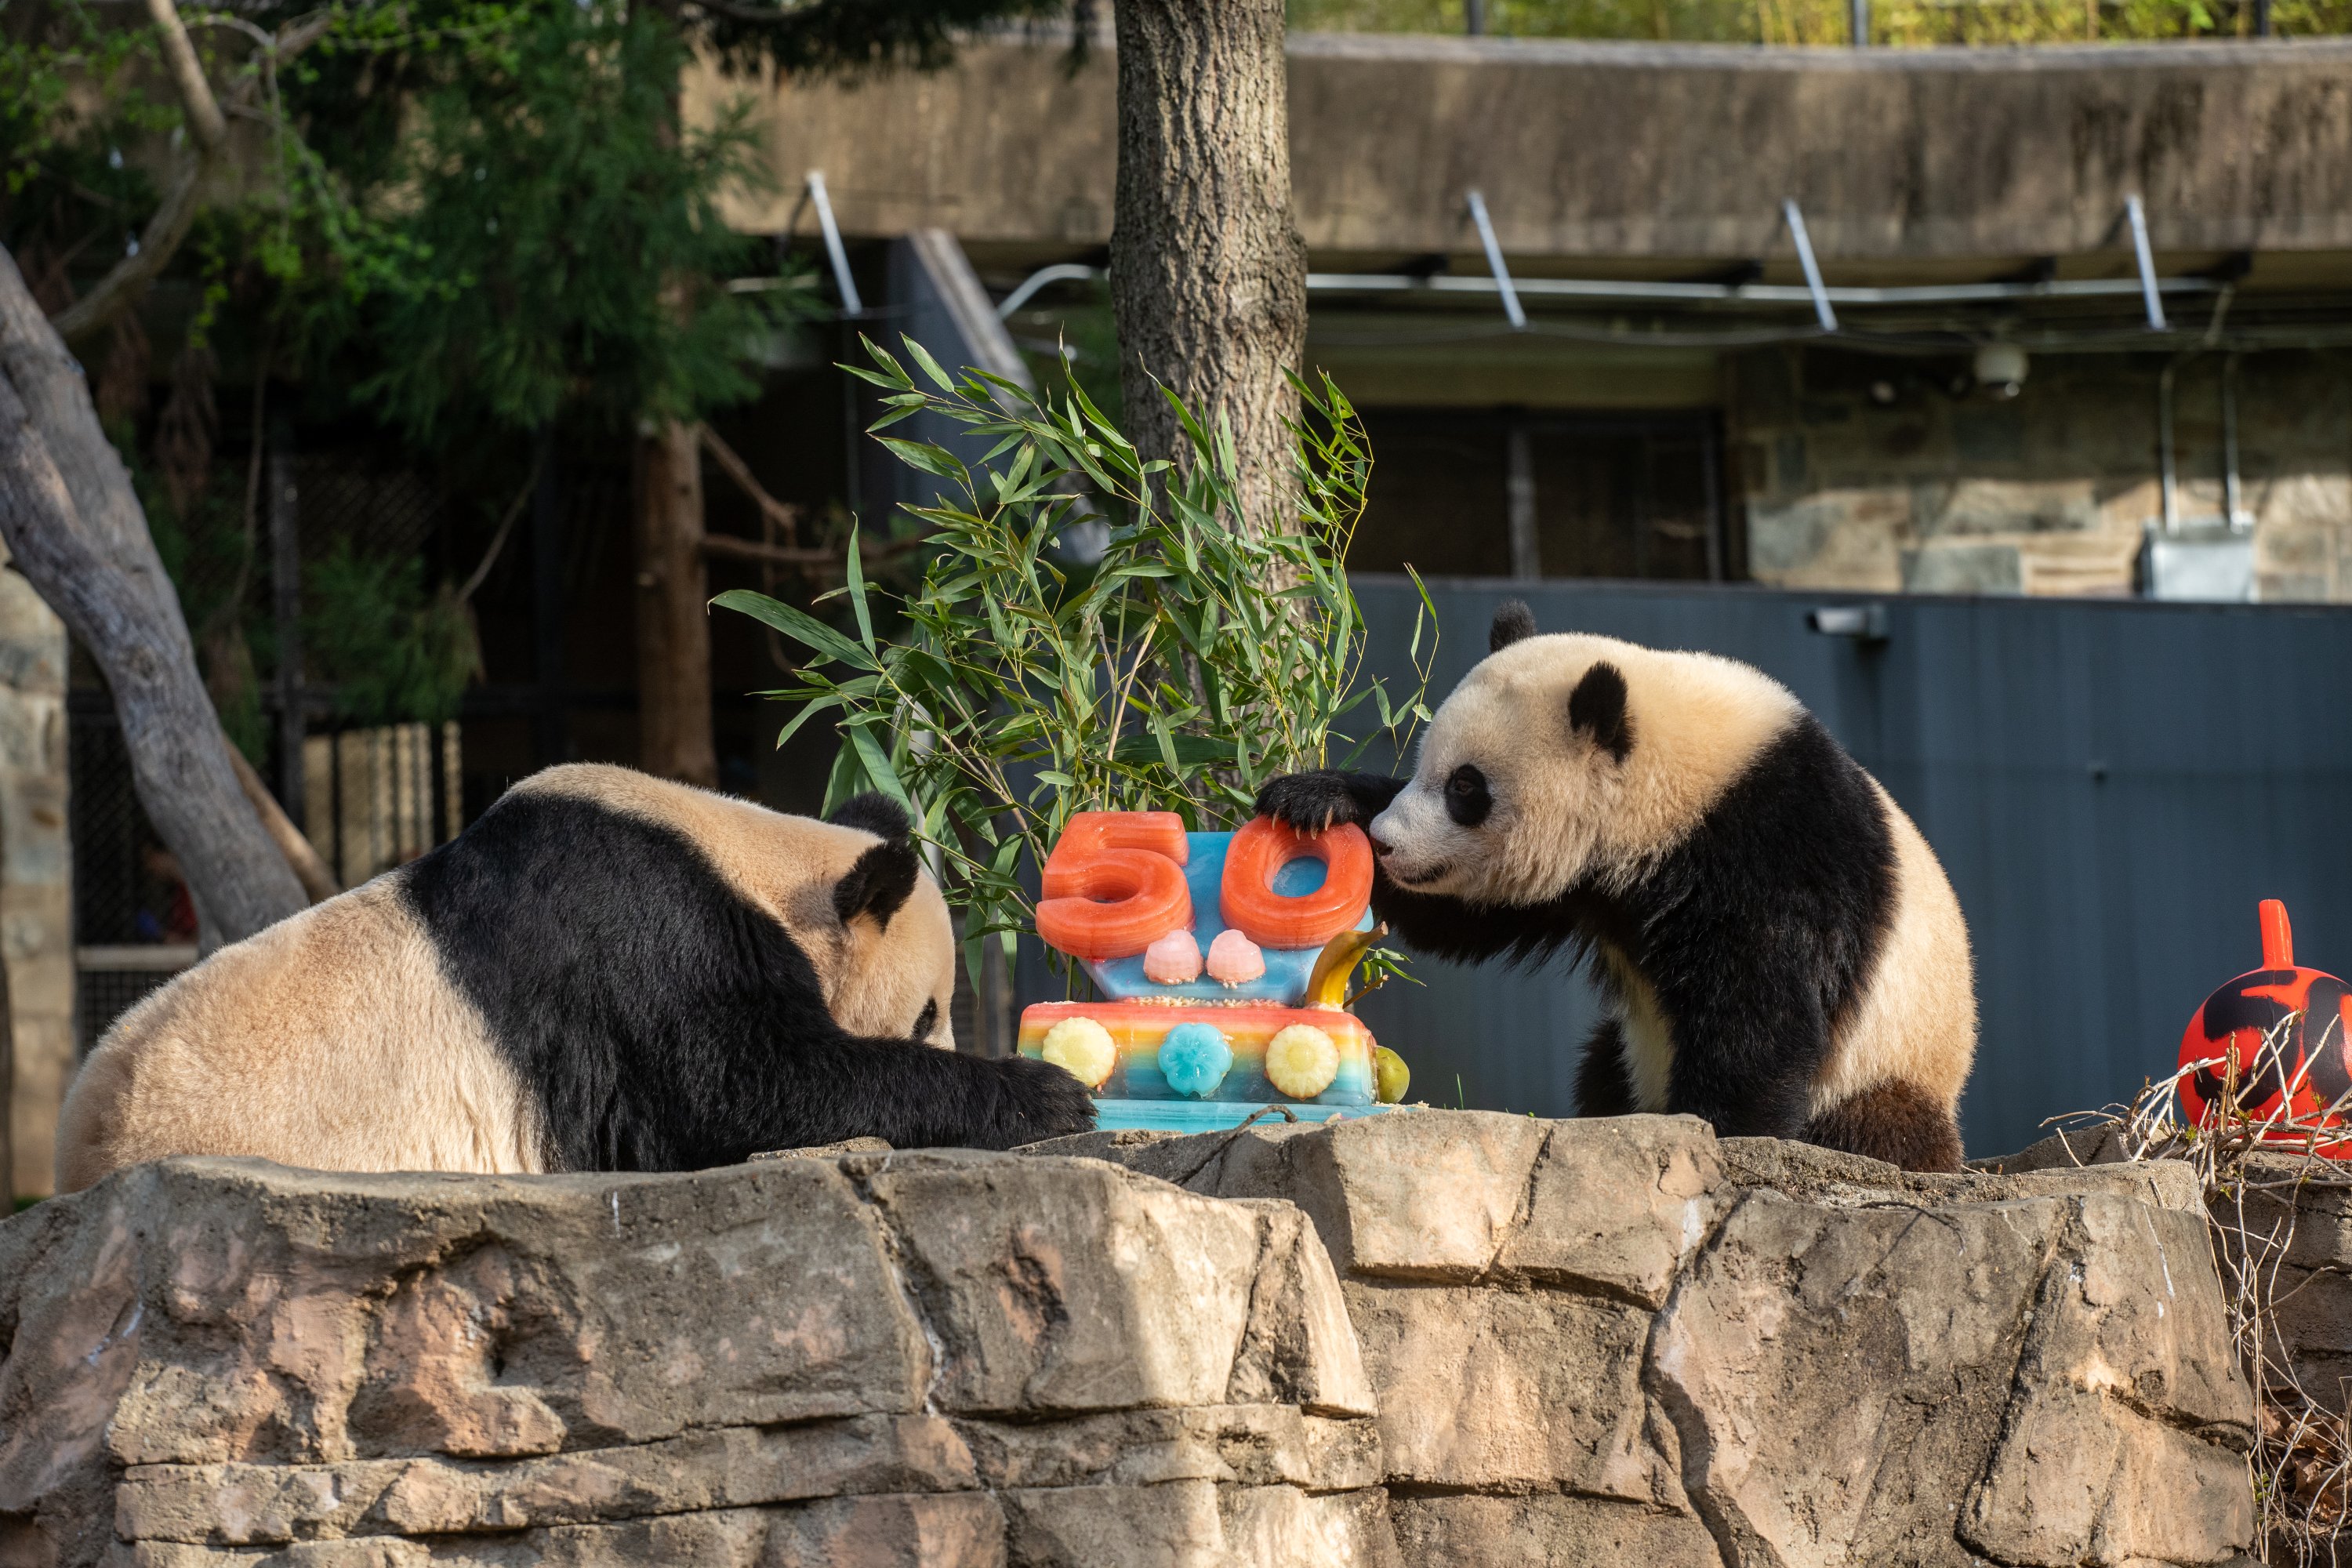 Holiday Cakes for Animals at DC's National Zoo